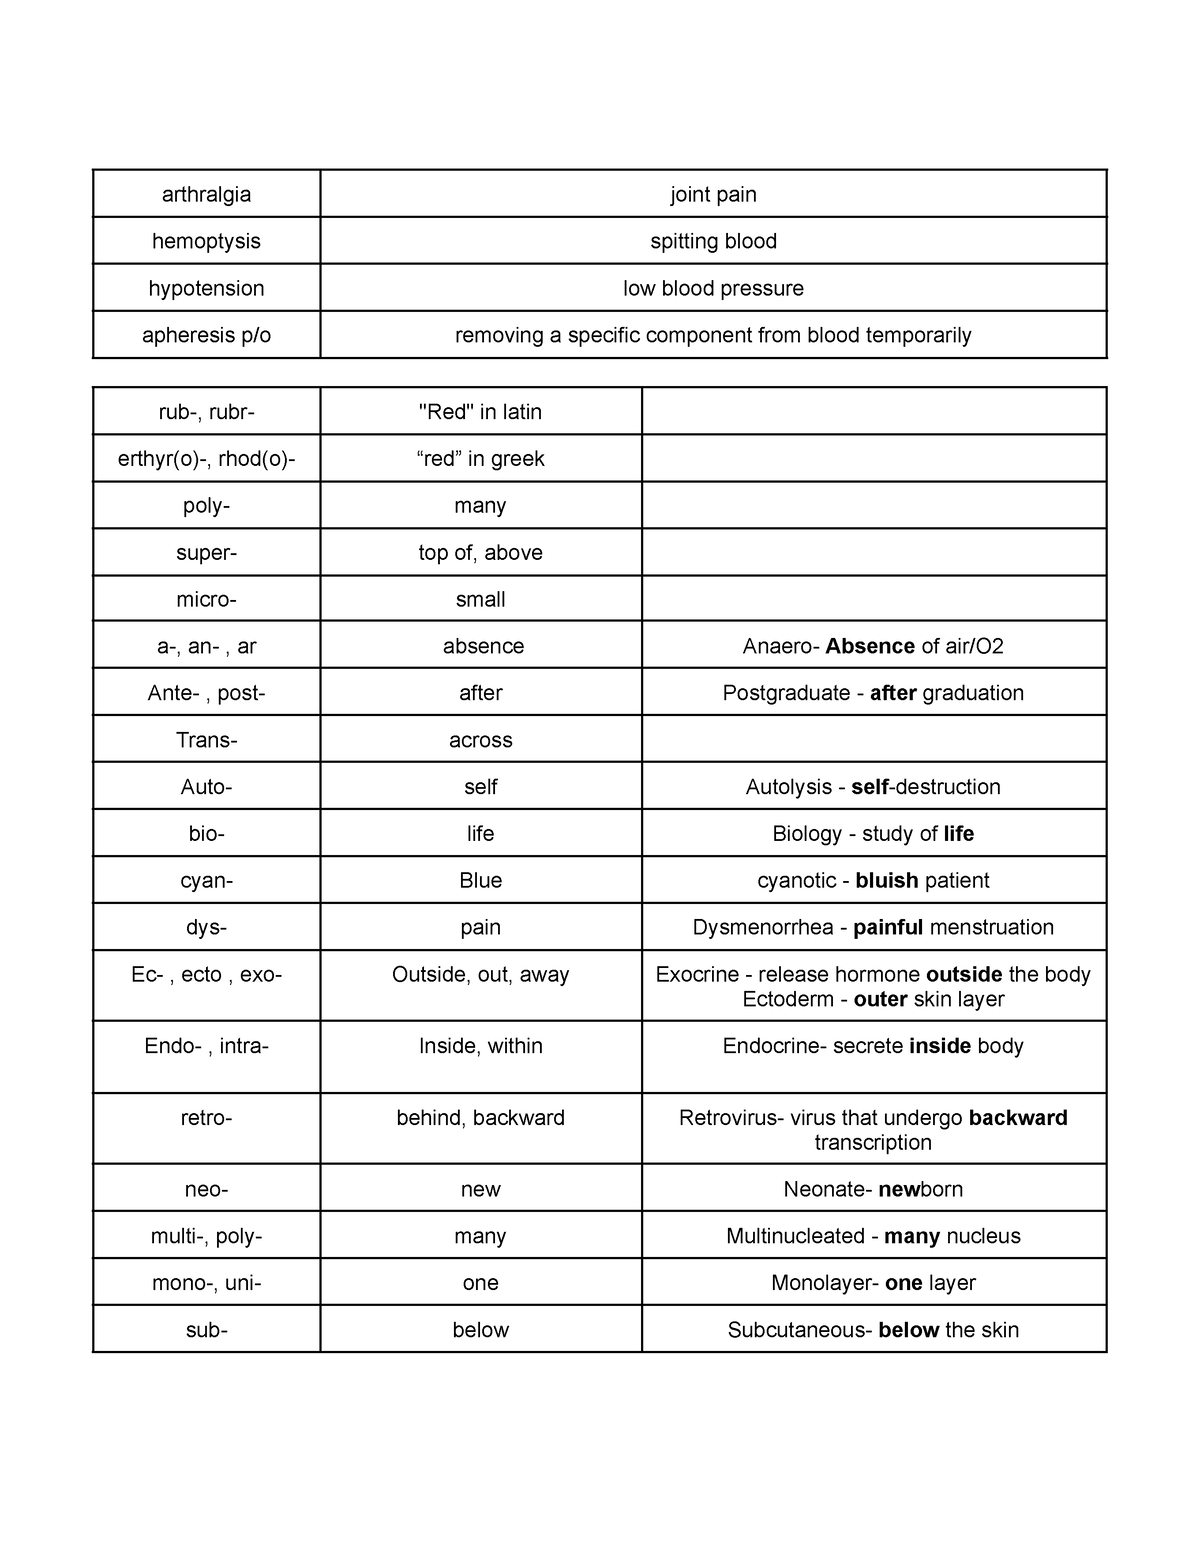 Common Prefix and Suffix used in medical terms - arthralgia joint pain ...